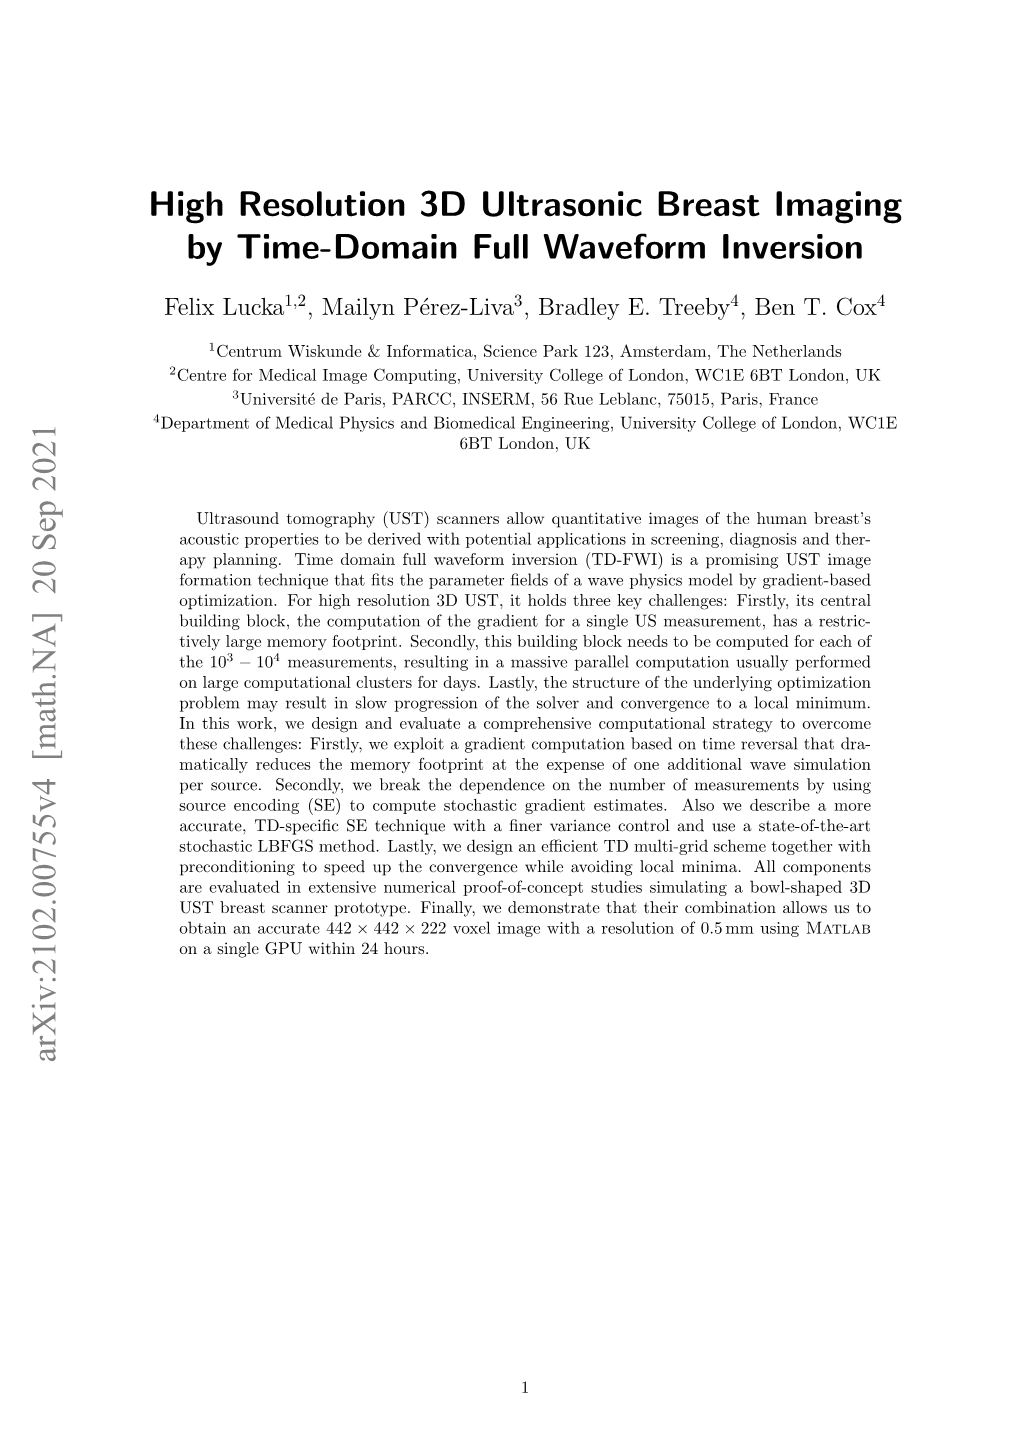 High Resolution 3D Ultrasonic Breast Imaging by Time-Domain Full Waveform Inversion